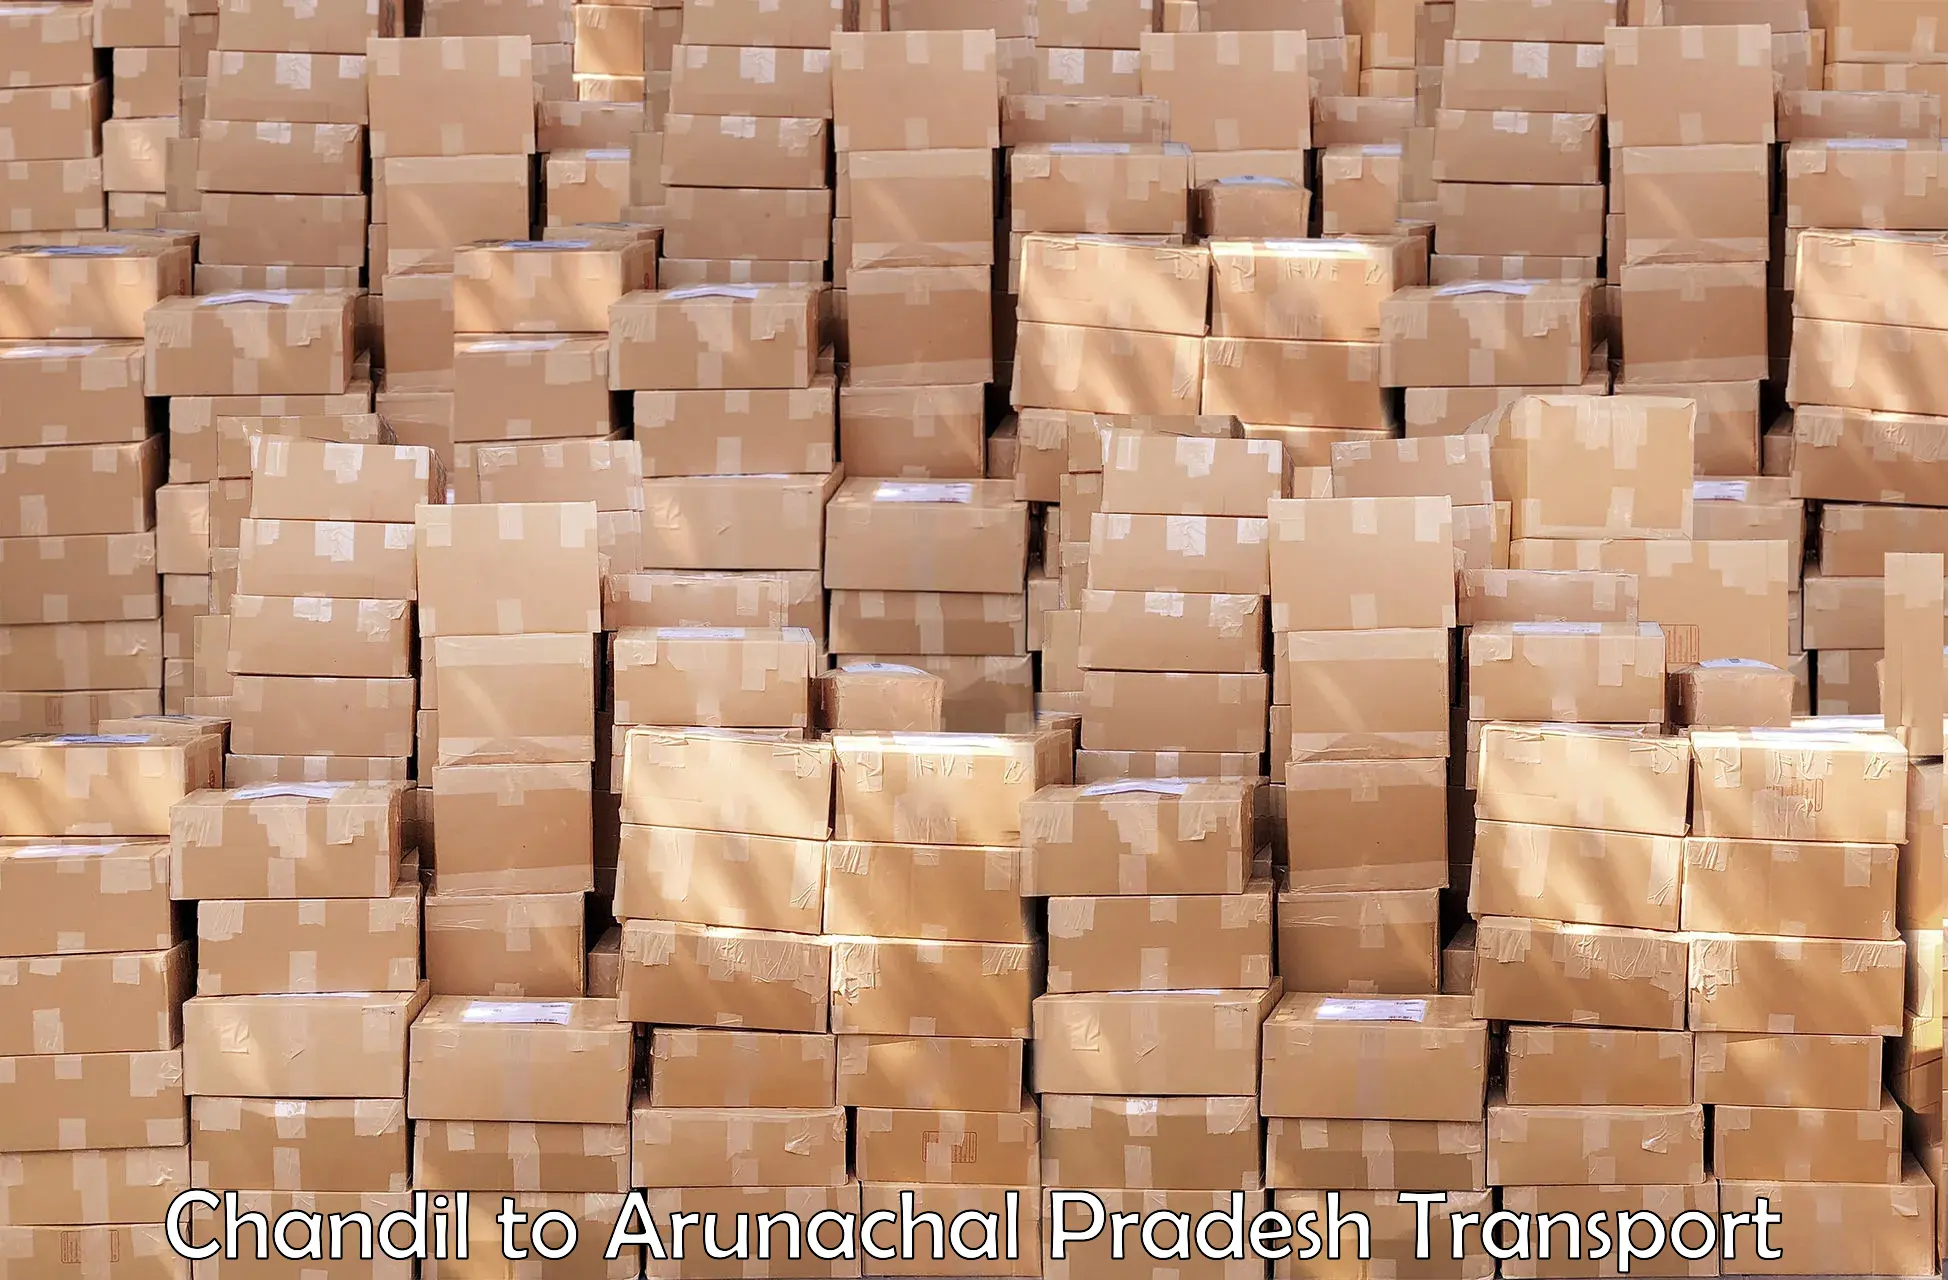 Truck transport companies in India Chandil to Sagalee